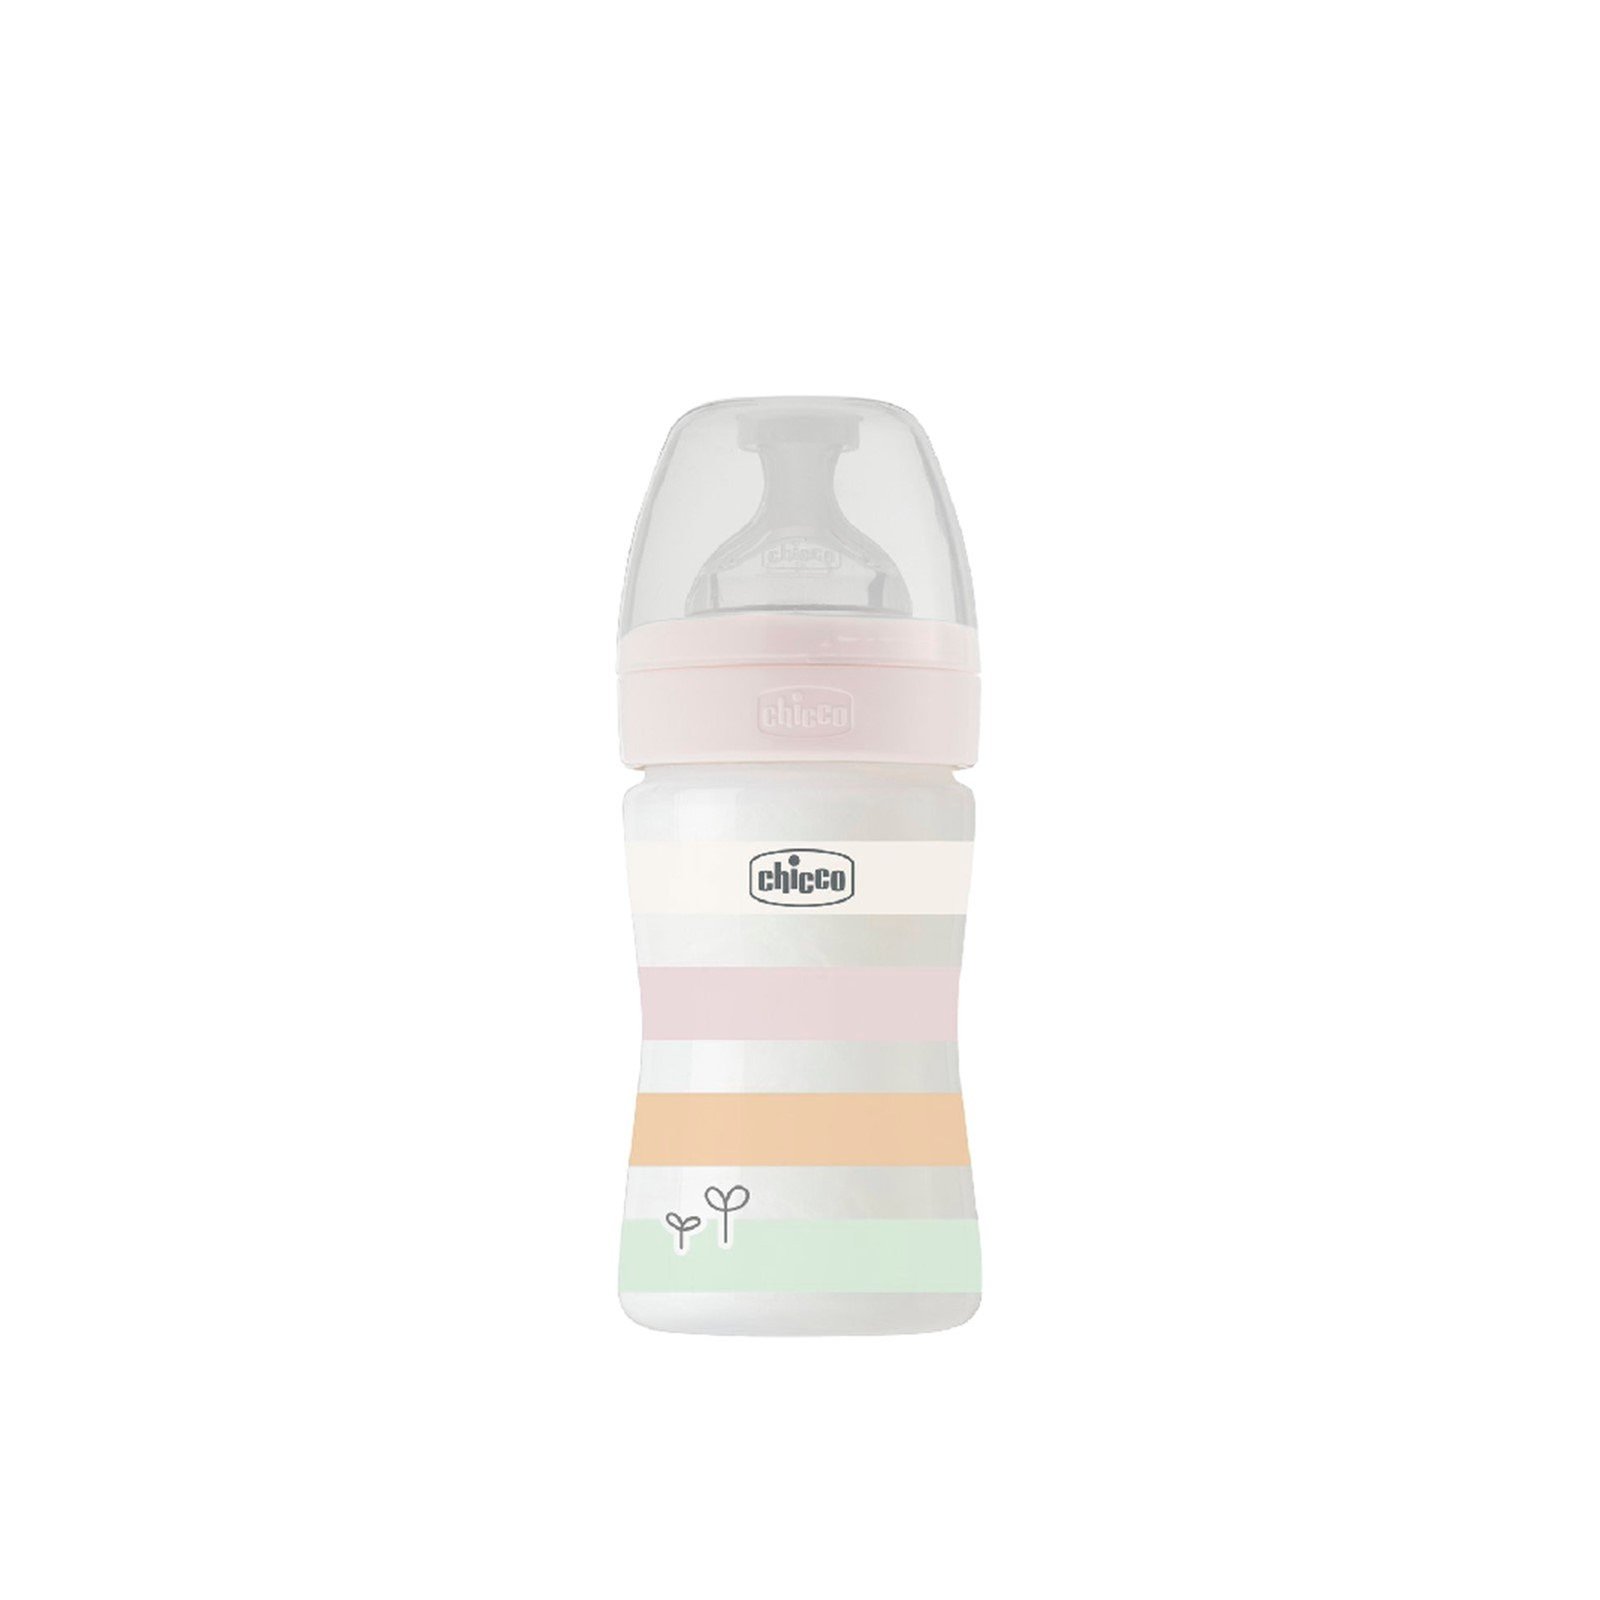 Chicco Well-Being Colors Bottle 0m+ White 150ml